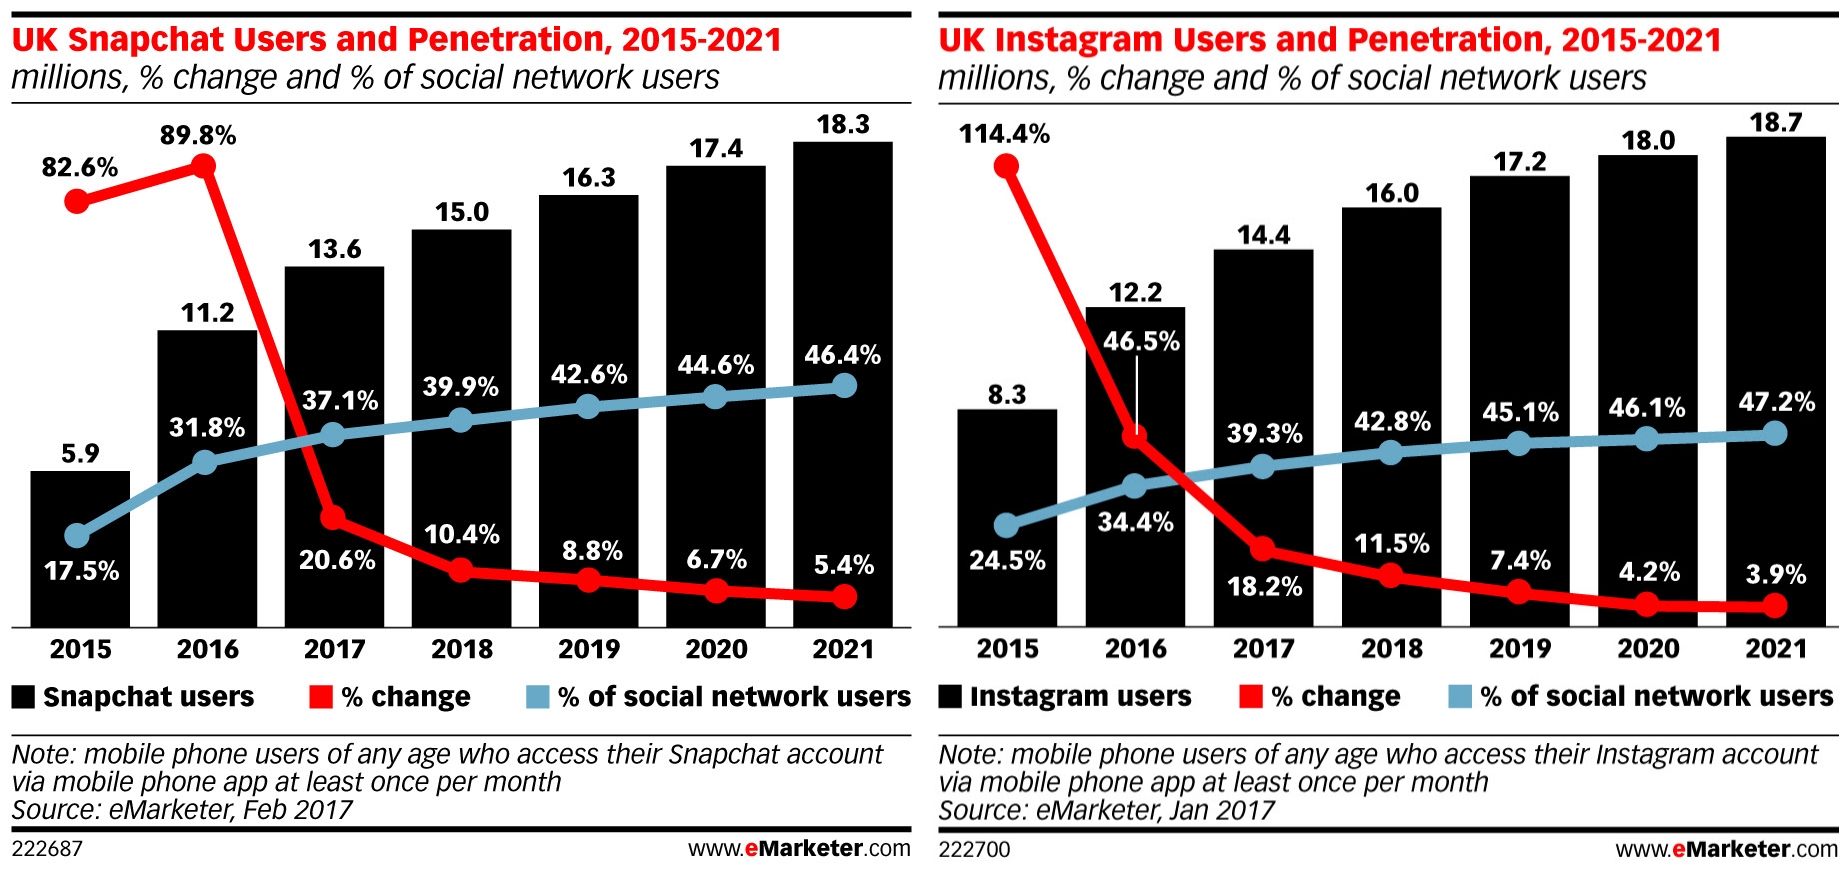 Snapchat and Instagram Show Impressive UK User Growth